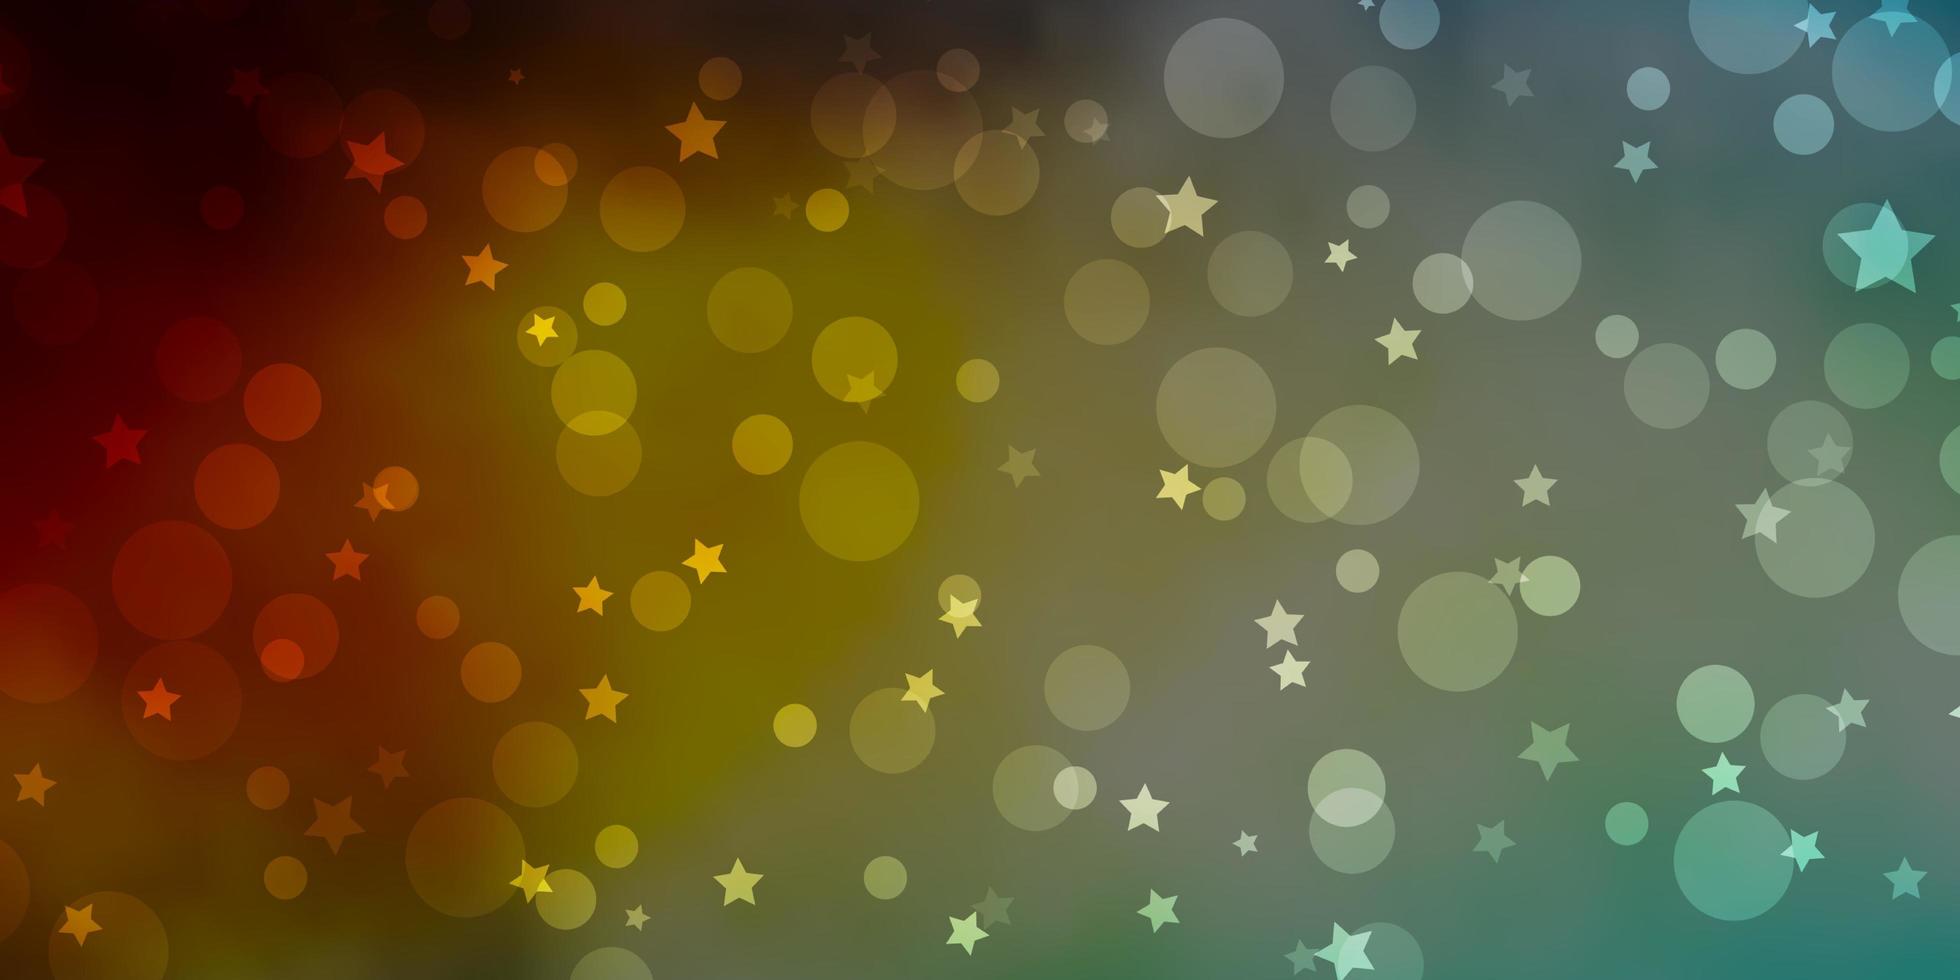 Light Blue, Yellow vector backdrop with circles, stars. Colorful disks, stars on simple gradient background. Design for wallpaper, fabric makers.